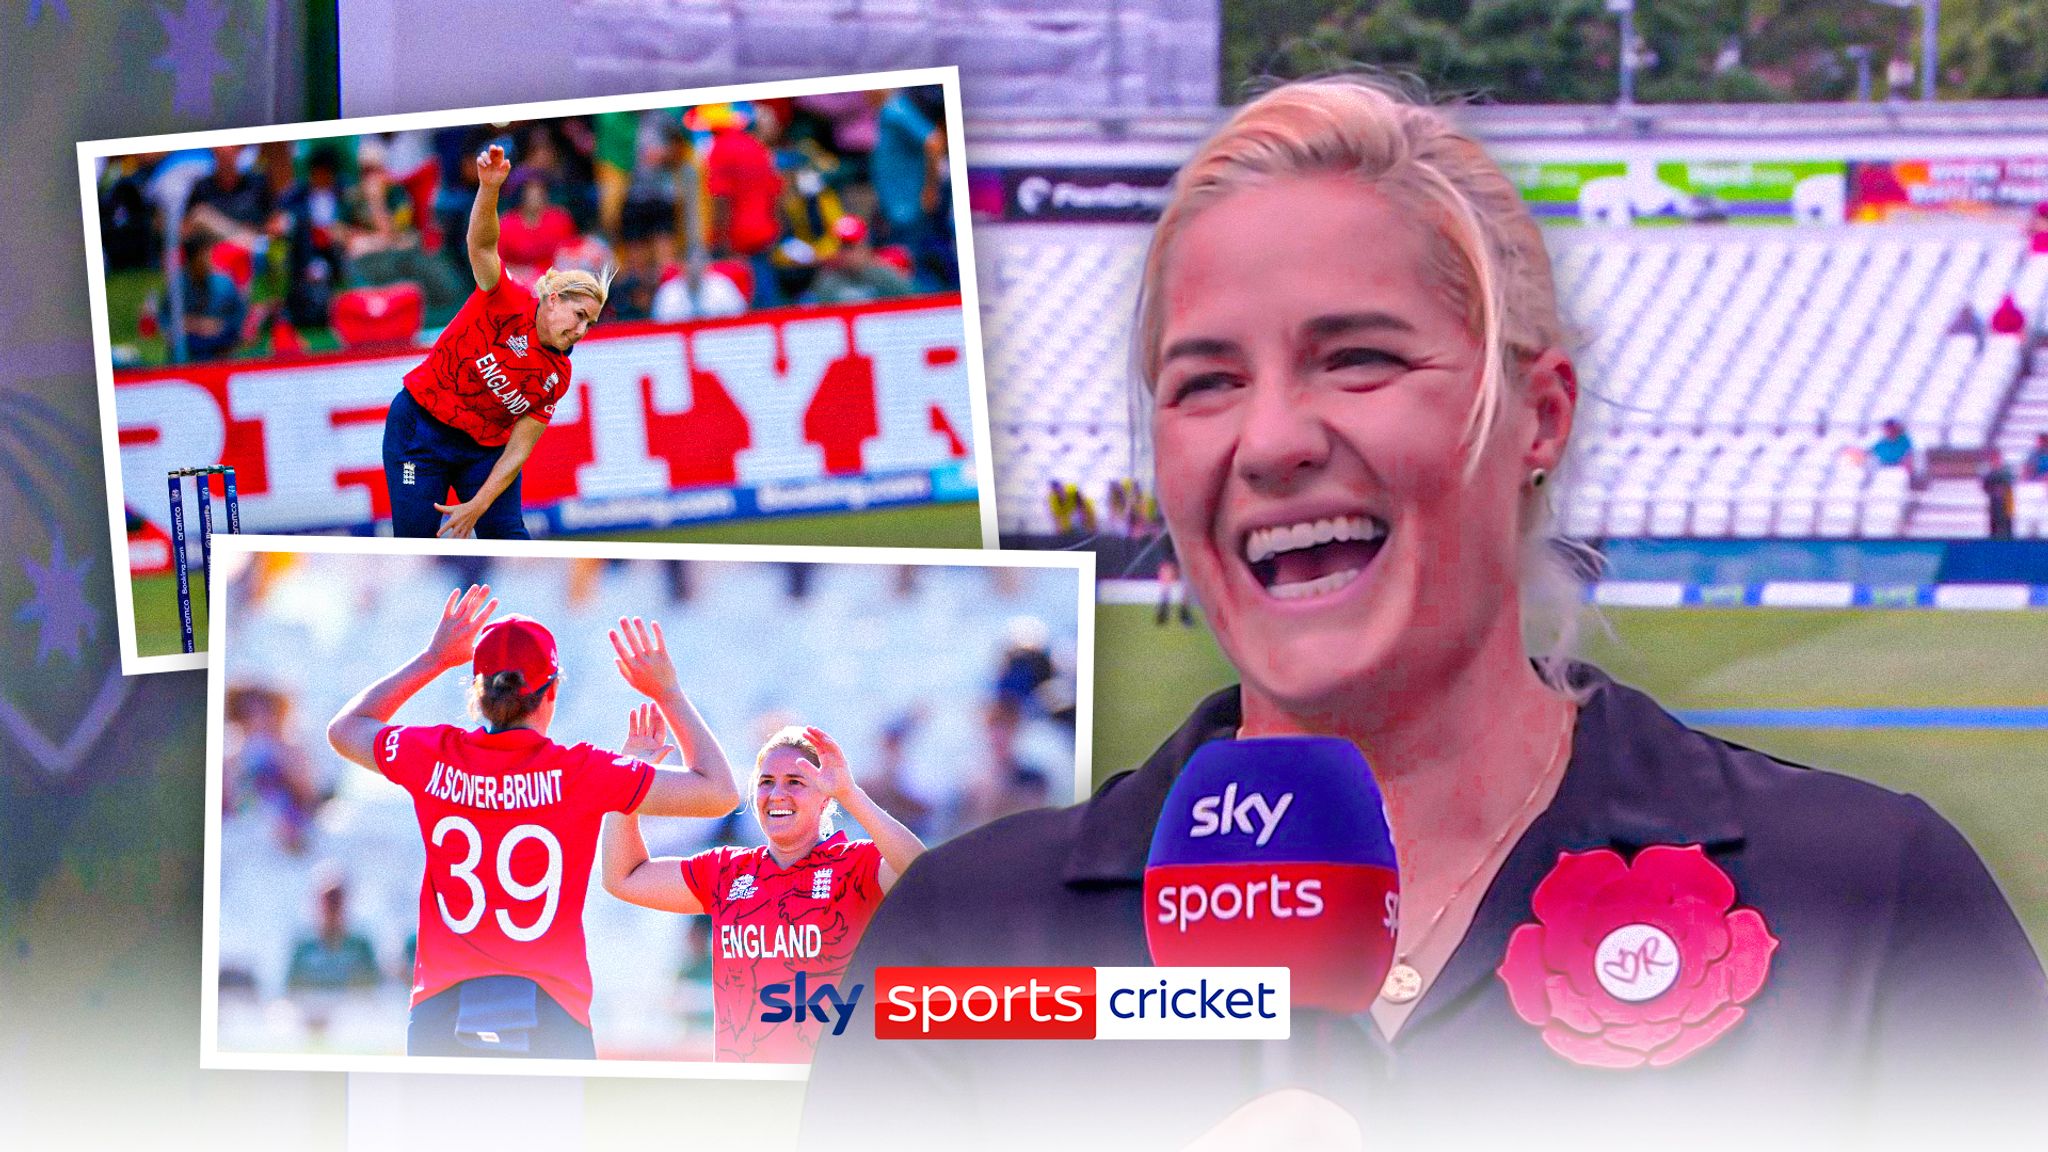 Anyone else would have given up Katherine Sciver-Brunts emotional journey Video Watch TV Show Sky Sports